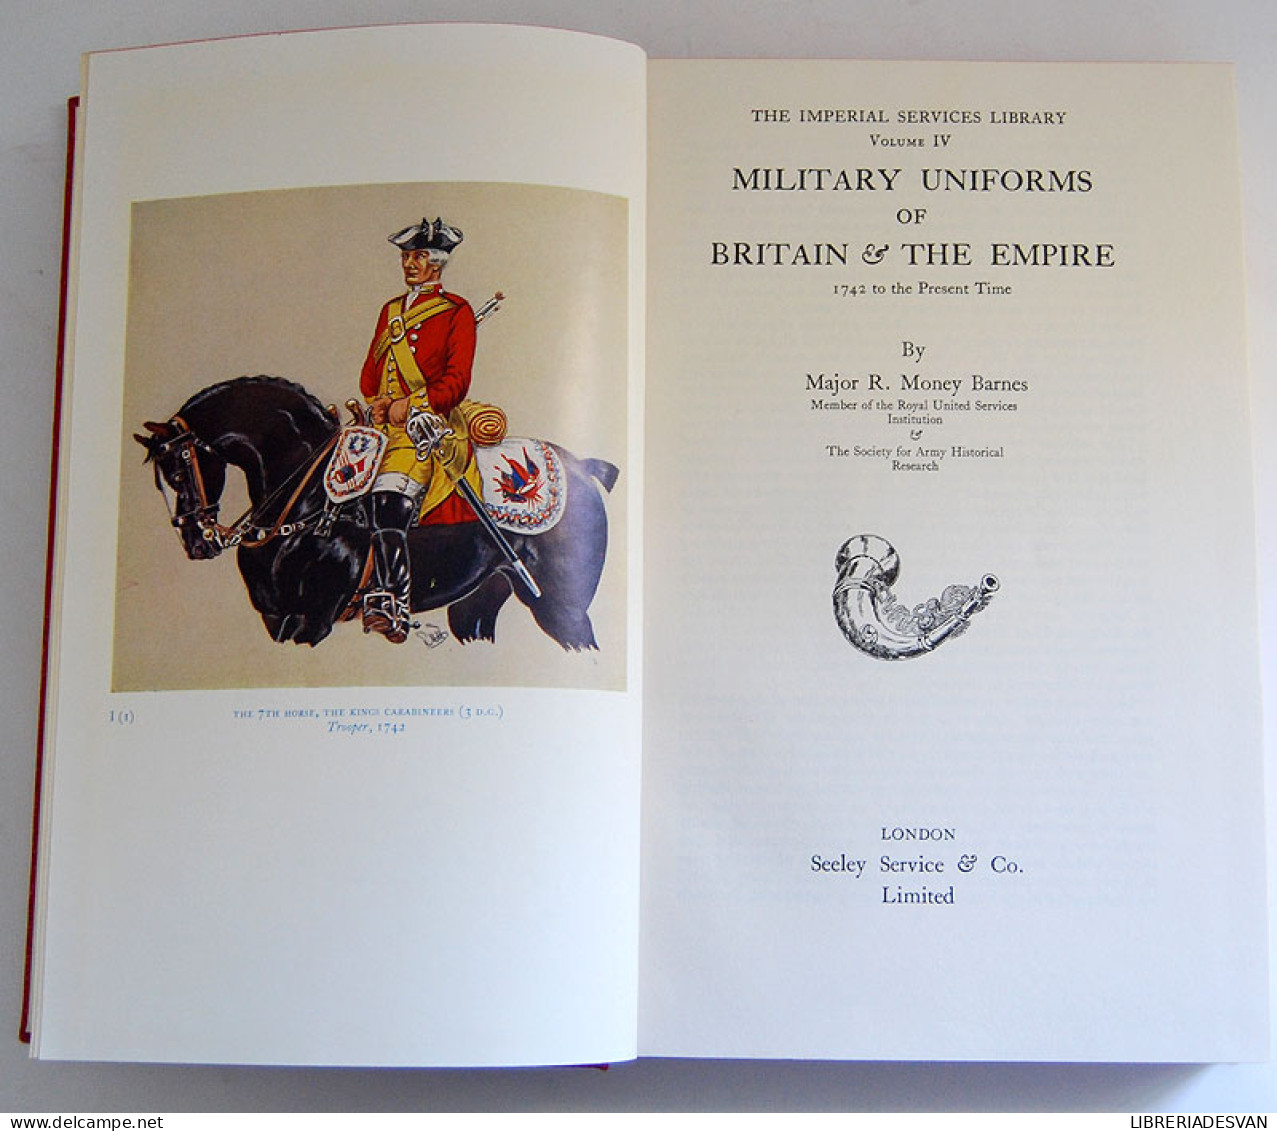 Military Uniforms Of Britain & The Empire. 1742 To The Present Time - Major R. Money Barnes - History & Arts